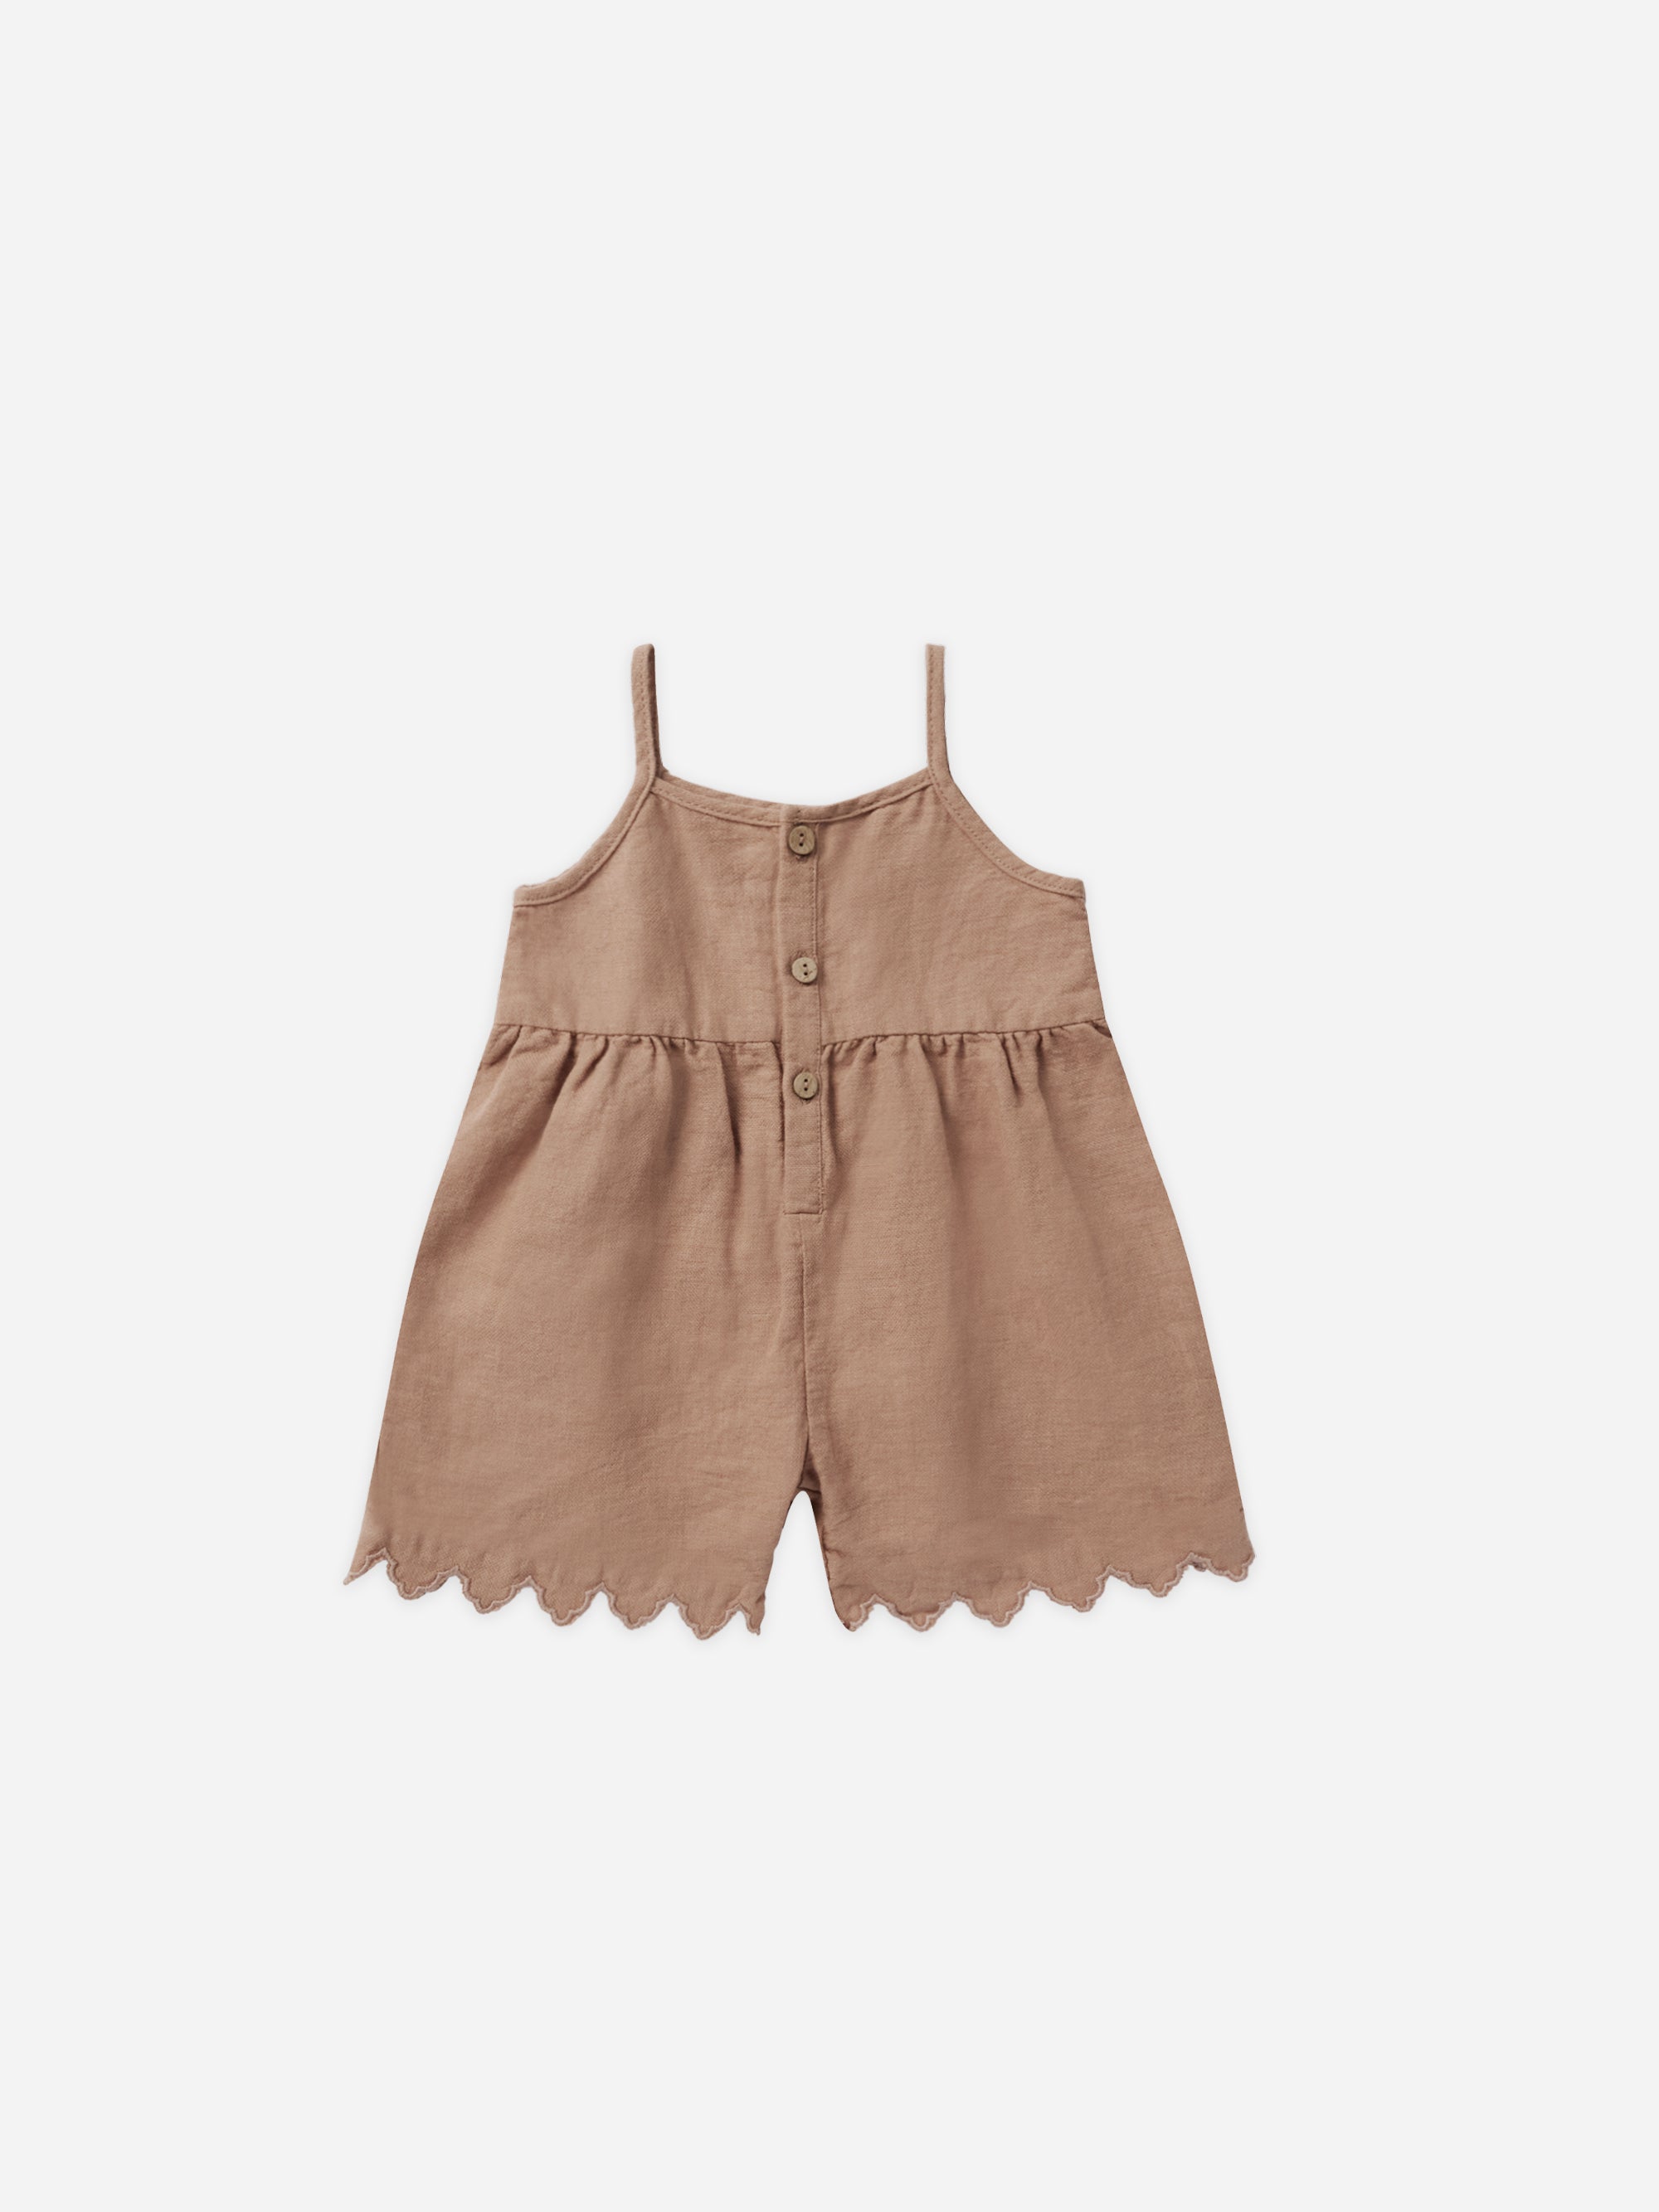 Button Romper || Clay - Rylee + Cru | Kids Clothes | Trendy Baby Clothes | Modern Infant Outfits |